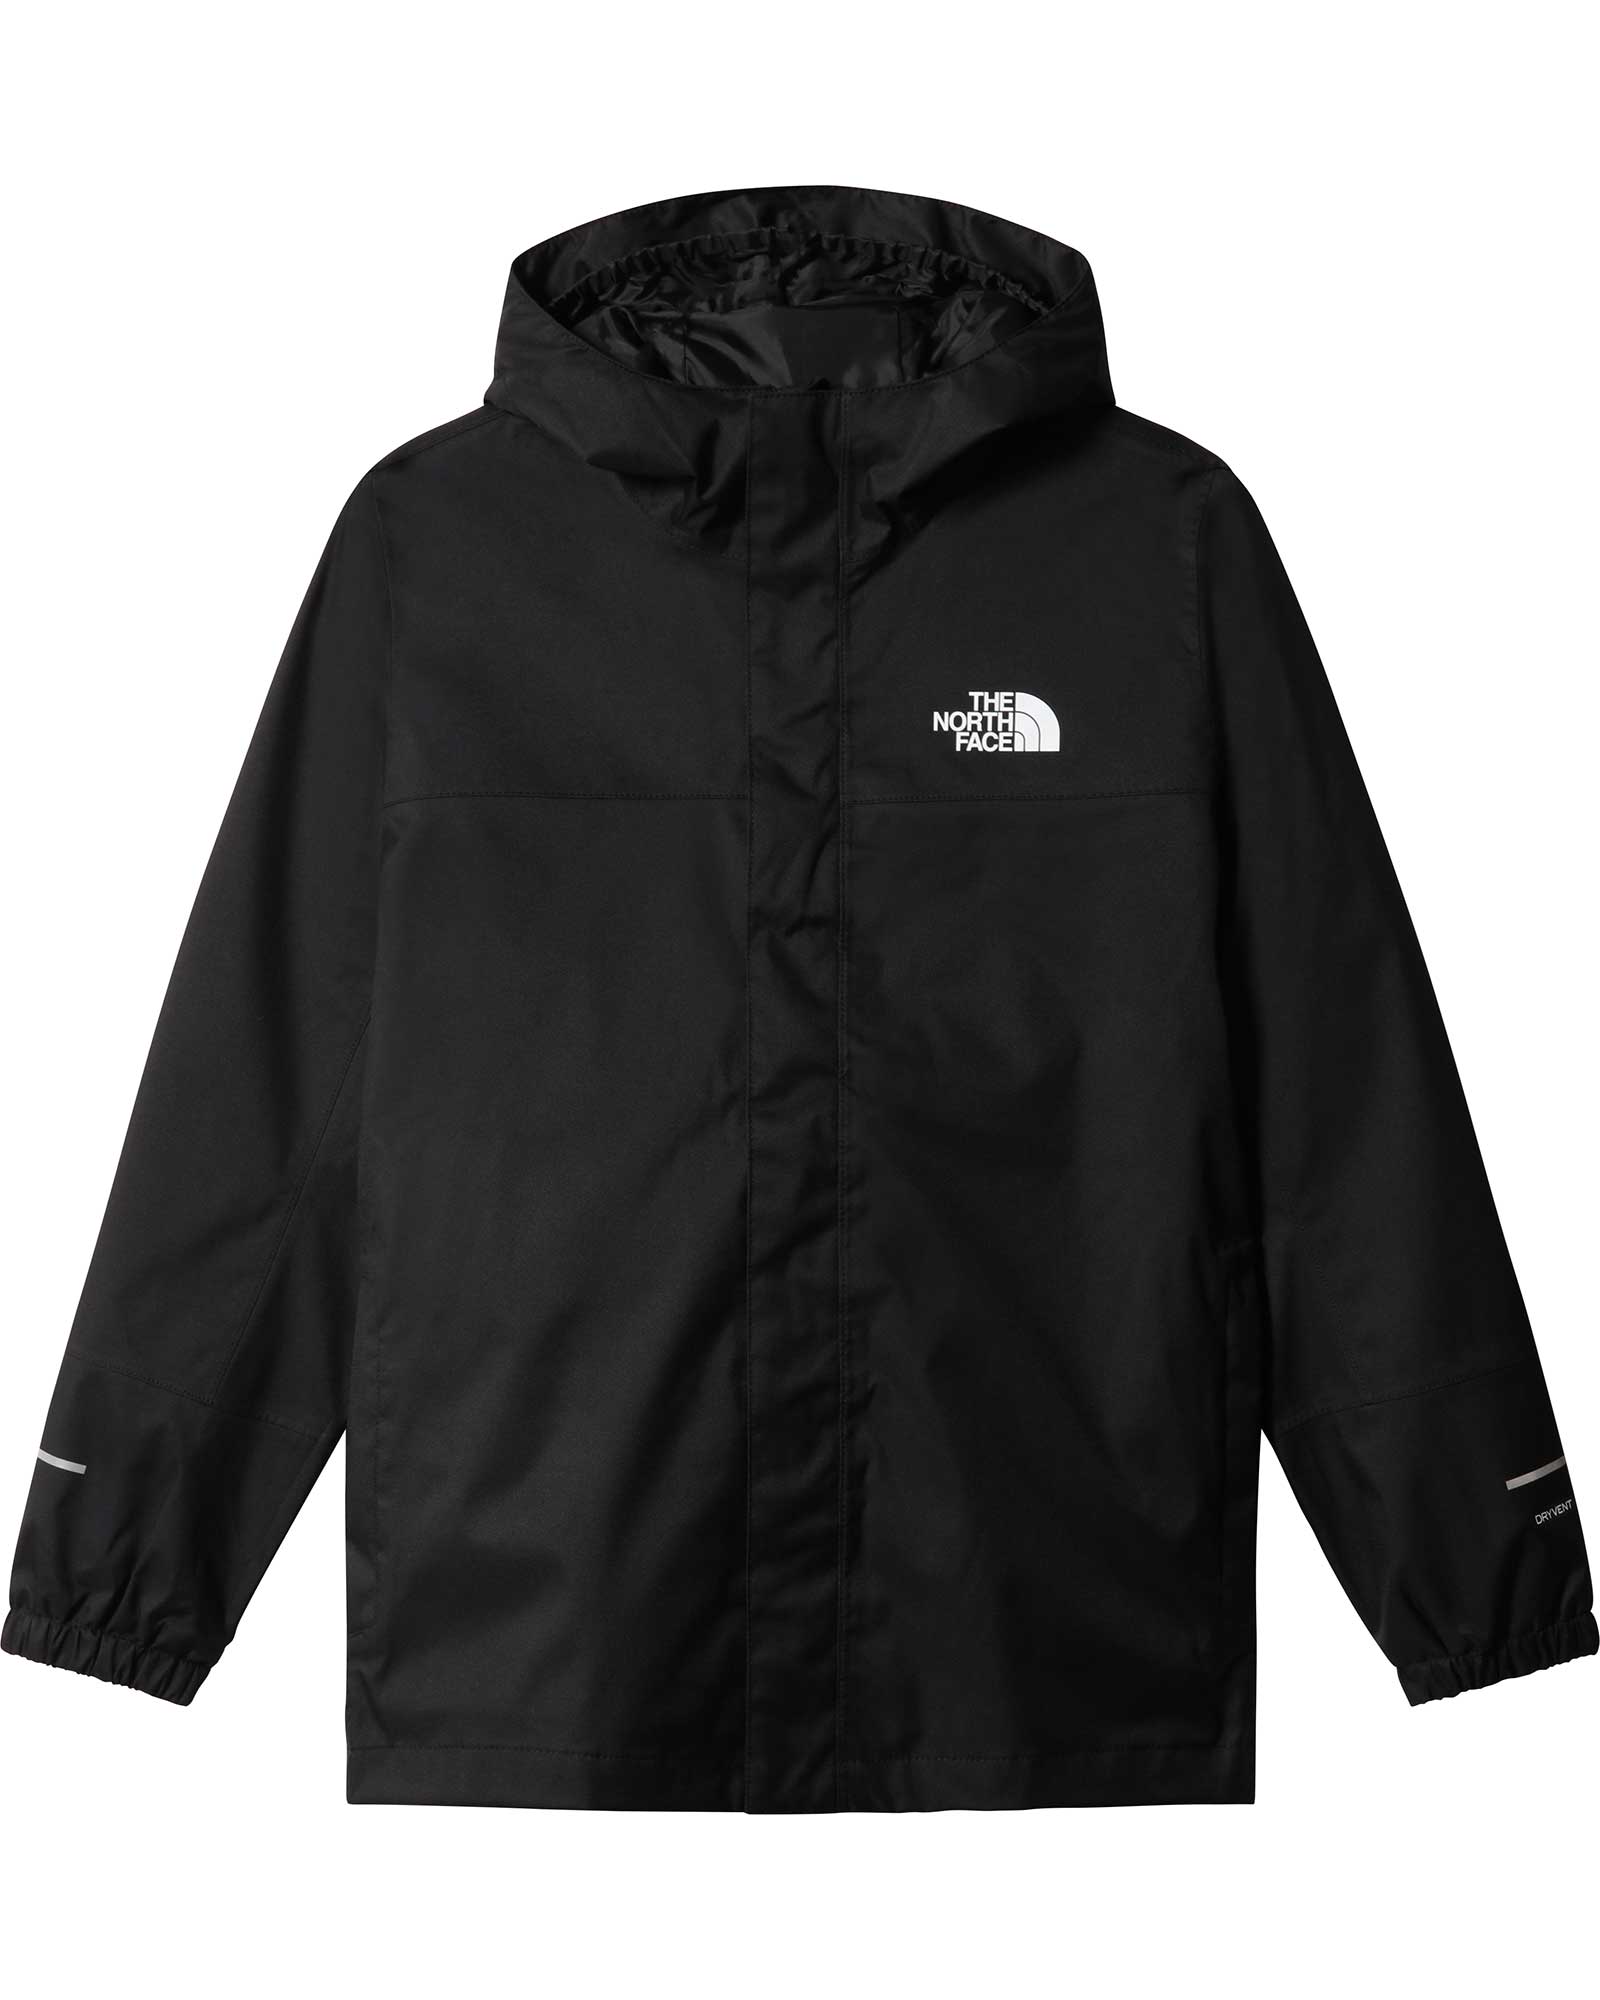 Product image of The North Face Antora Boys' Rain Jacket XL